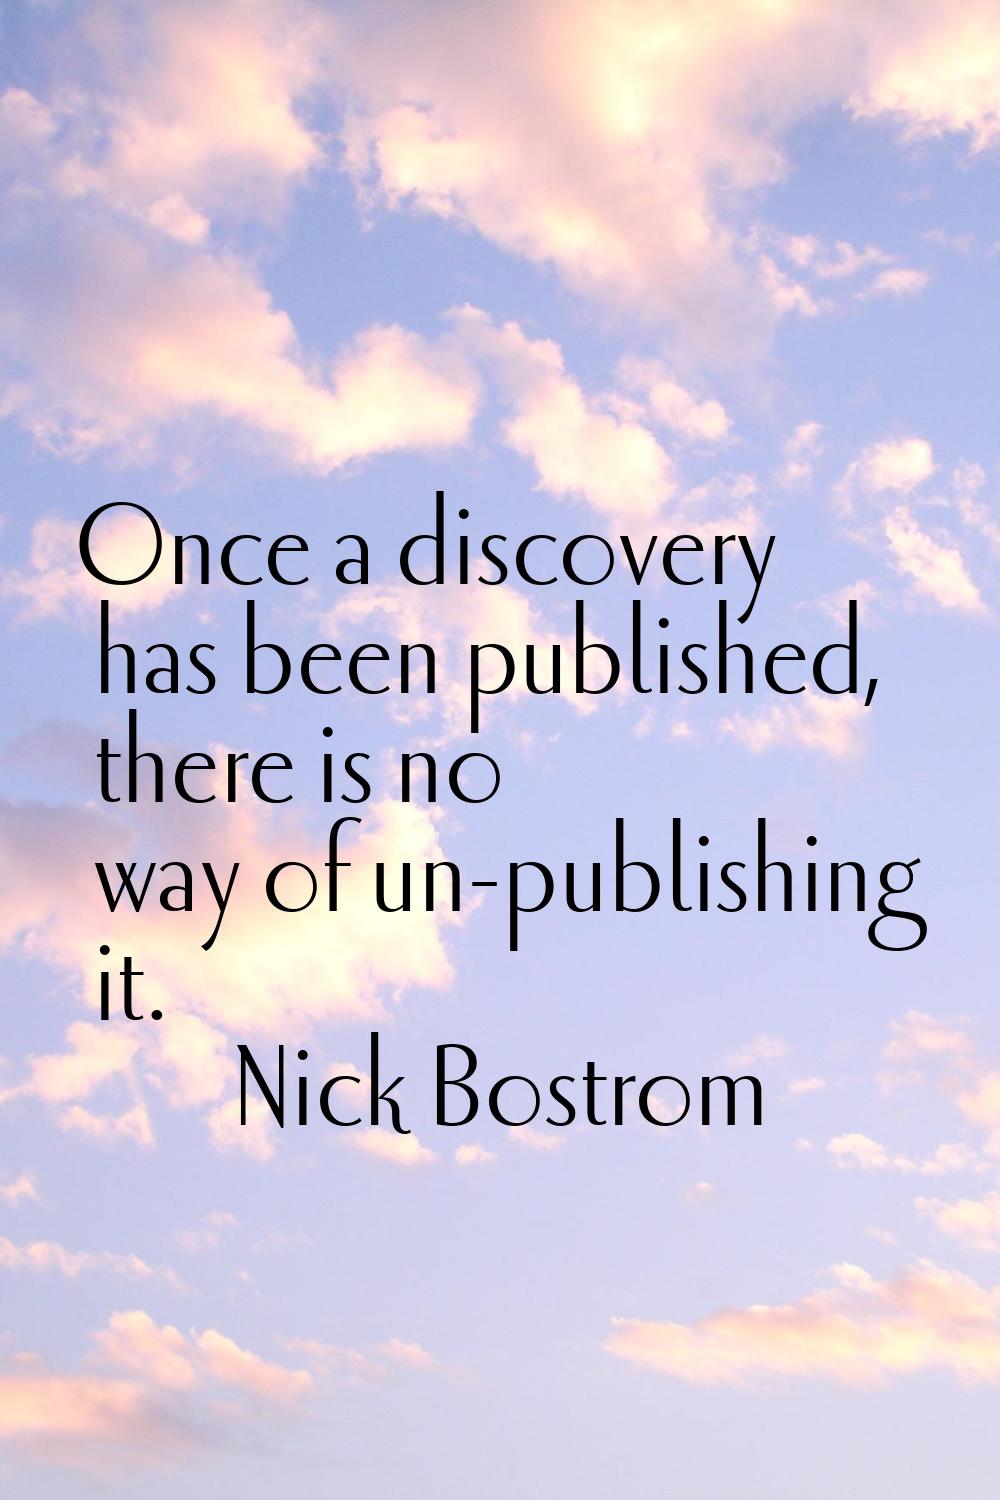 Once a discovery has been published, there is no way of un-publishing it.